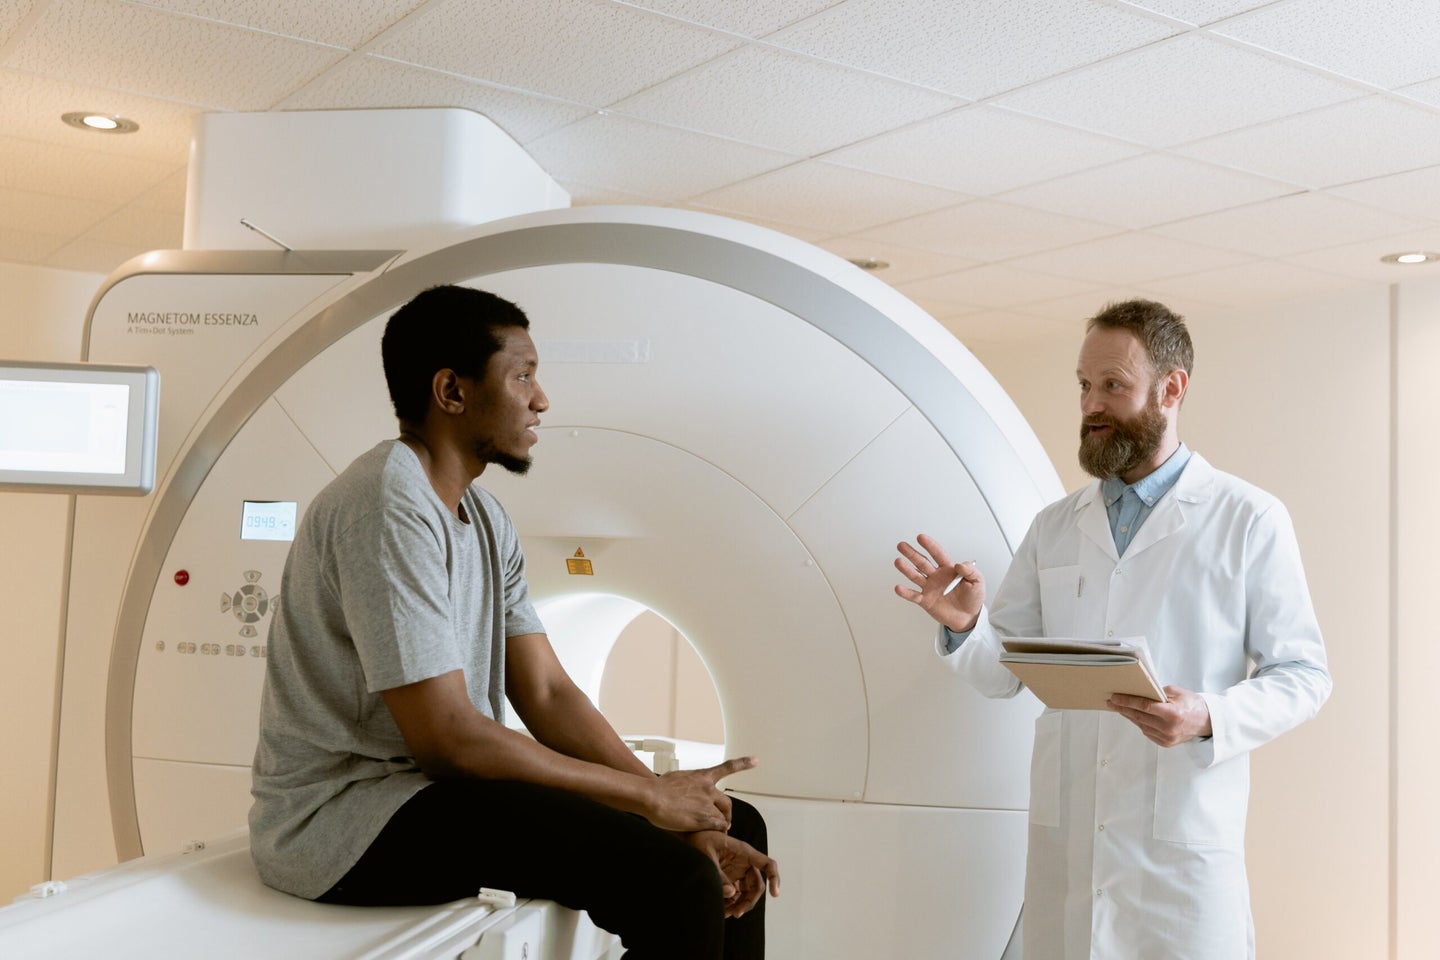 A doctor talks to a patient who is sitting on an MRI machine's bed.